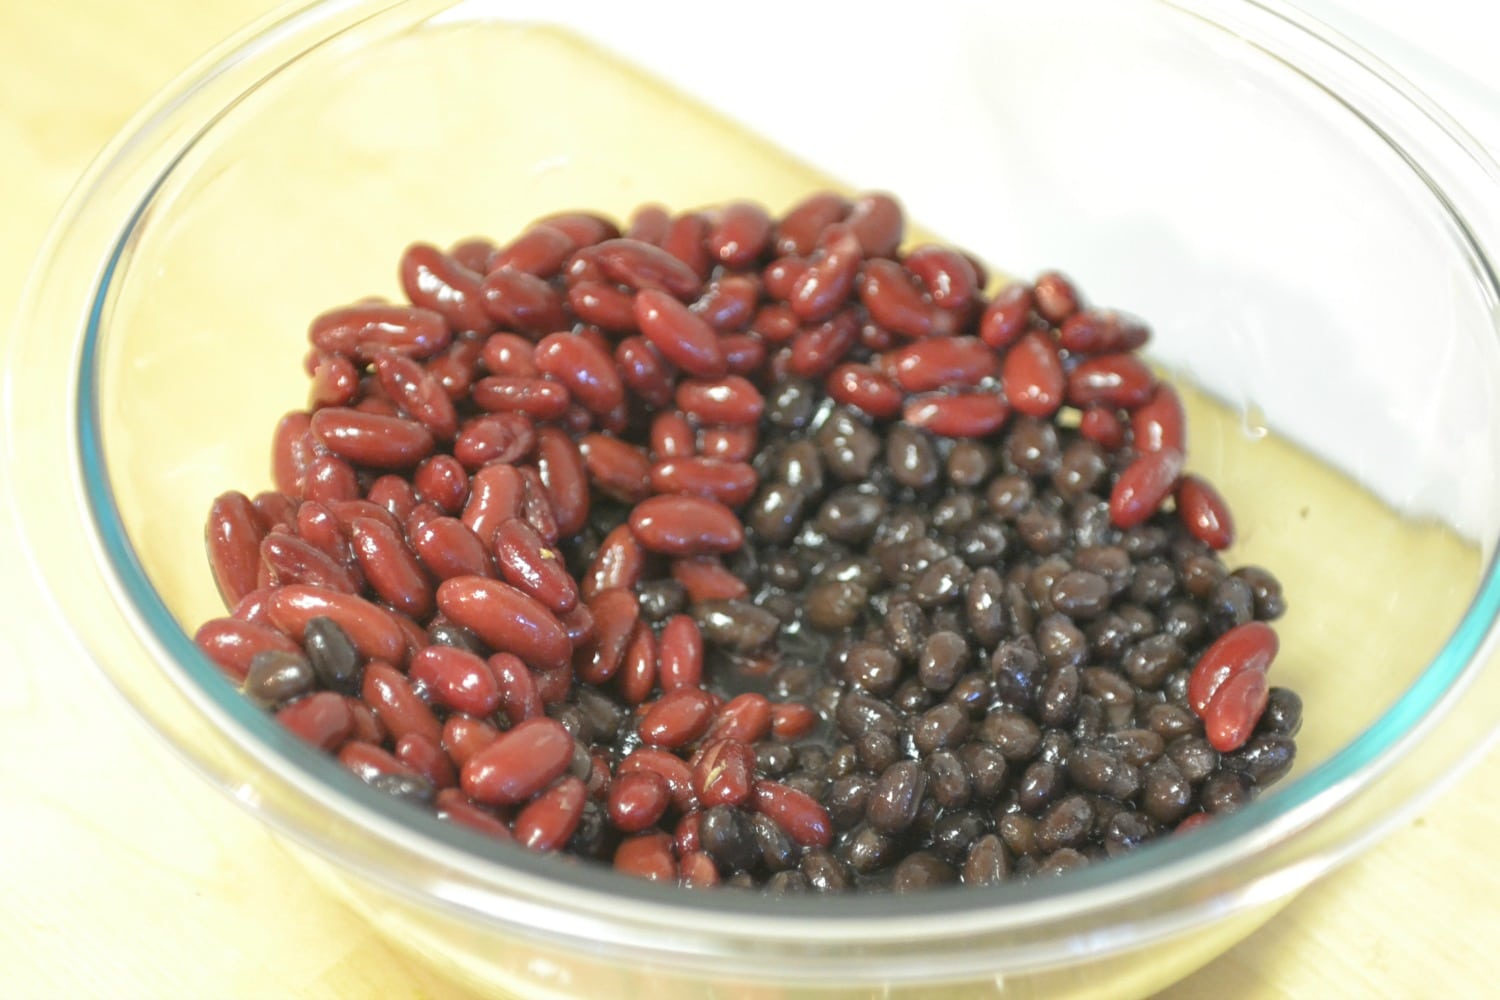 Drain and mix the kidney beans and black beans in a bowl. 